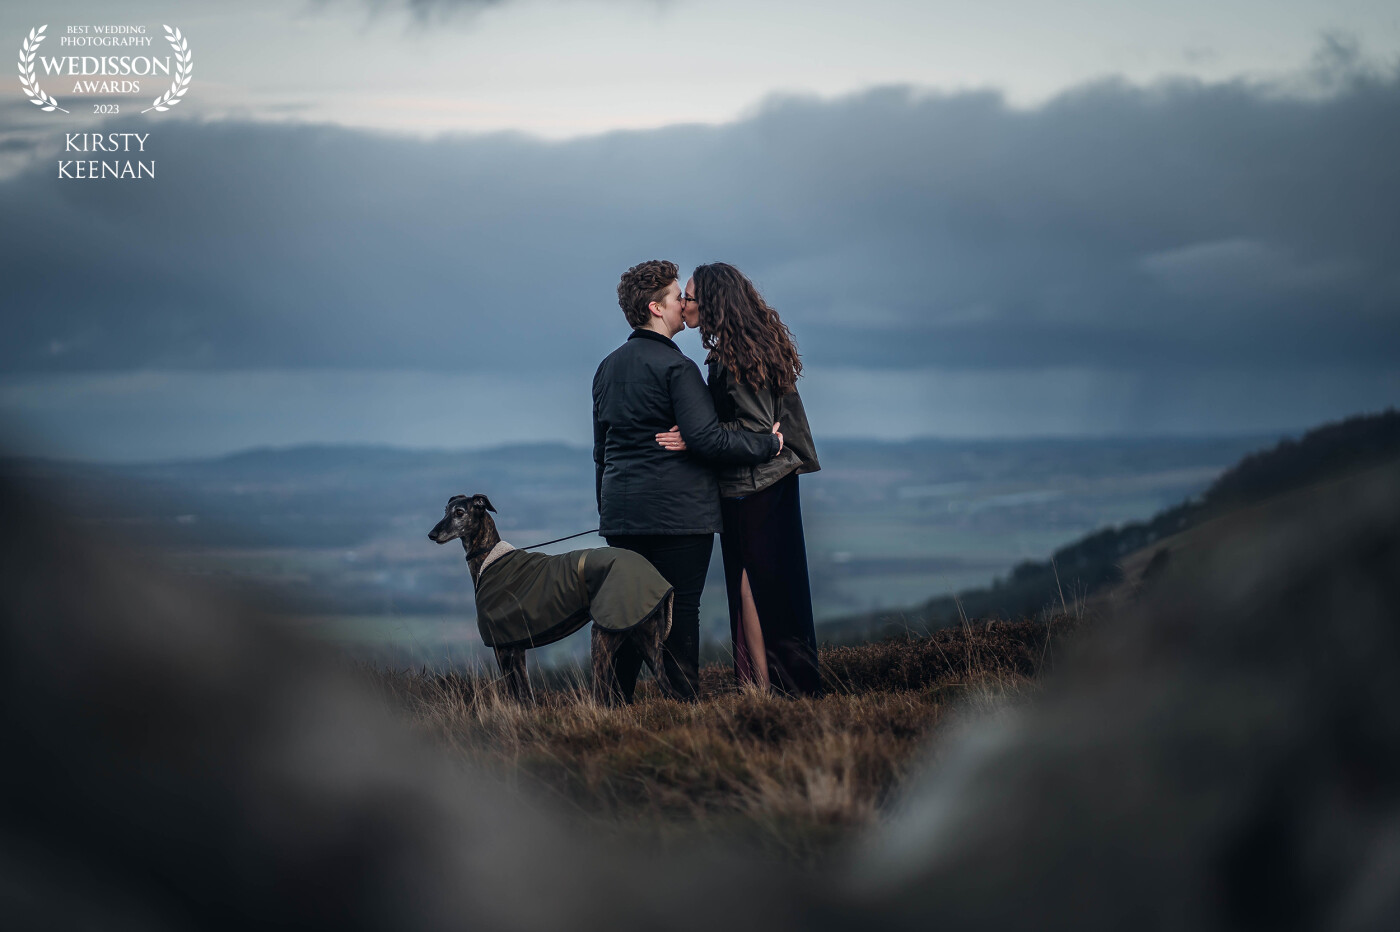 This was an engagement shoot up in the lomond Hills in Scotland. We had every sky possible that day from moody and grey to a stunning golden hour. It was such a special shoot as their 2 dogs got to come along too.